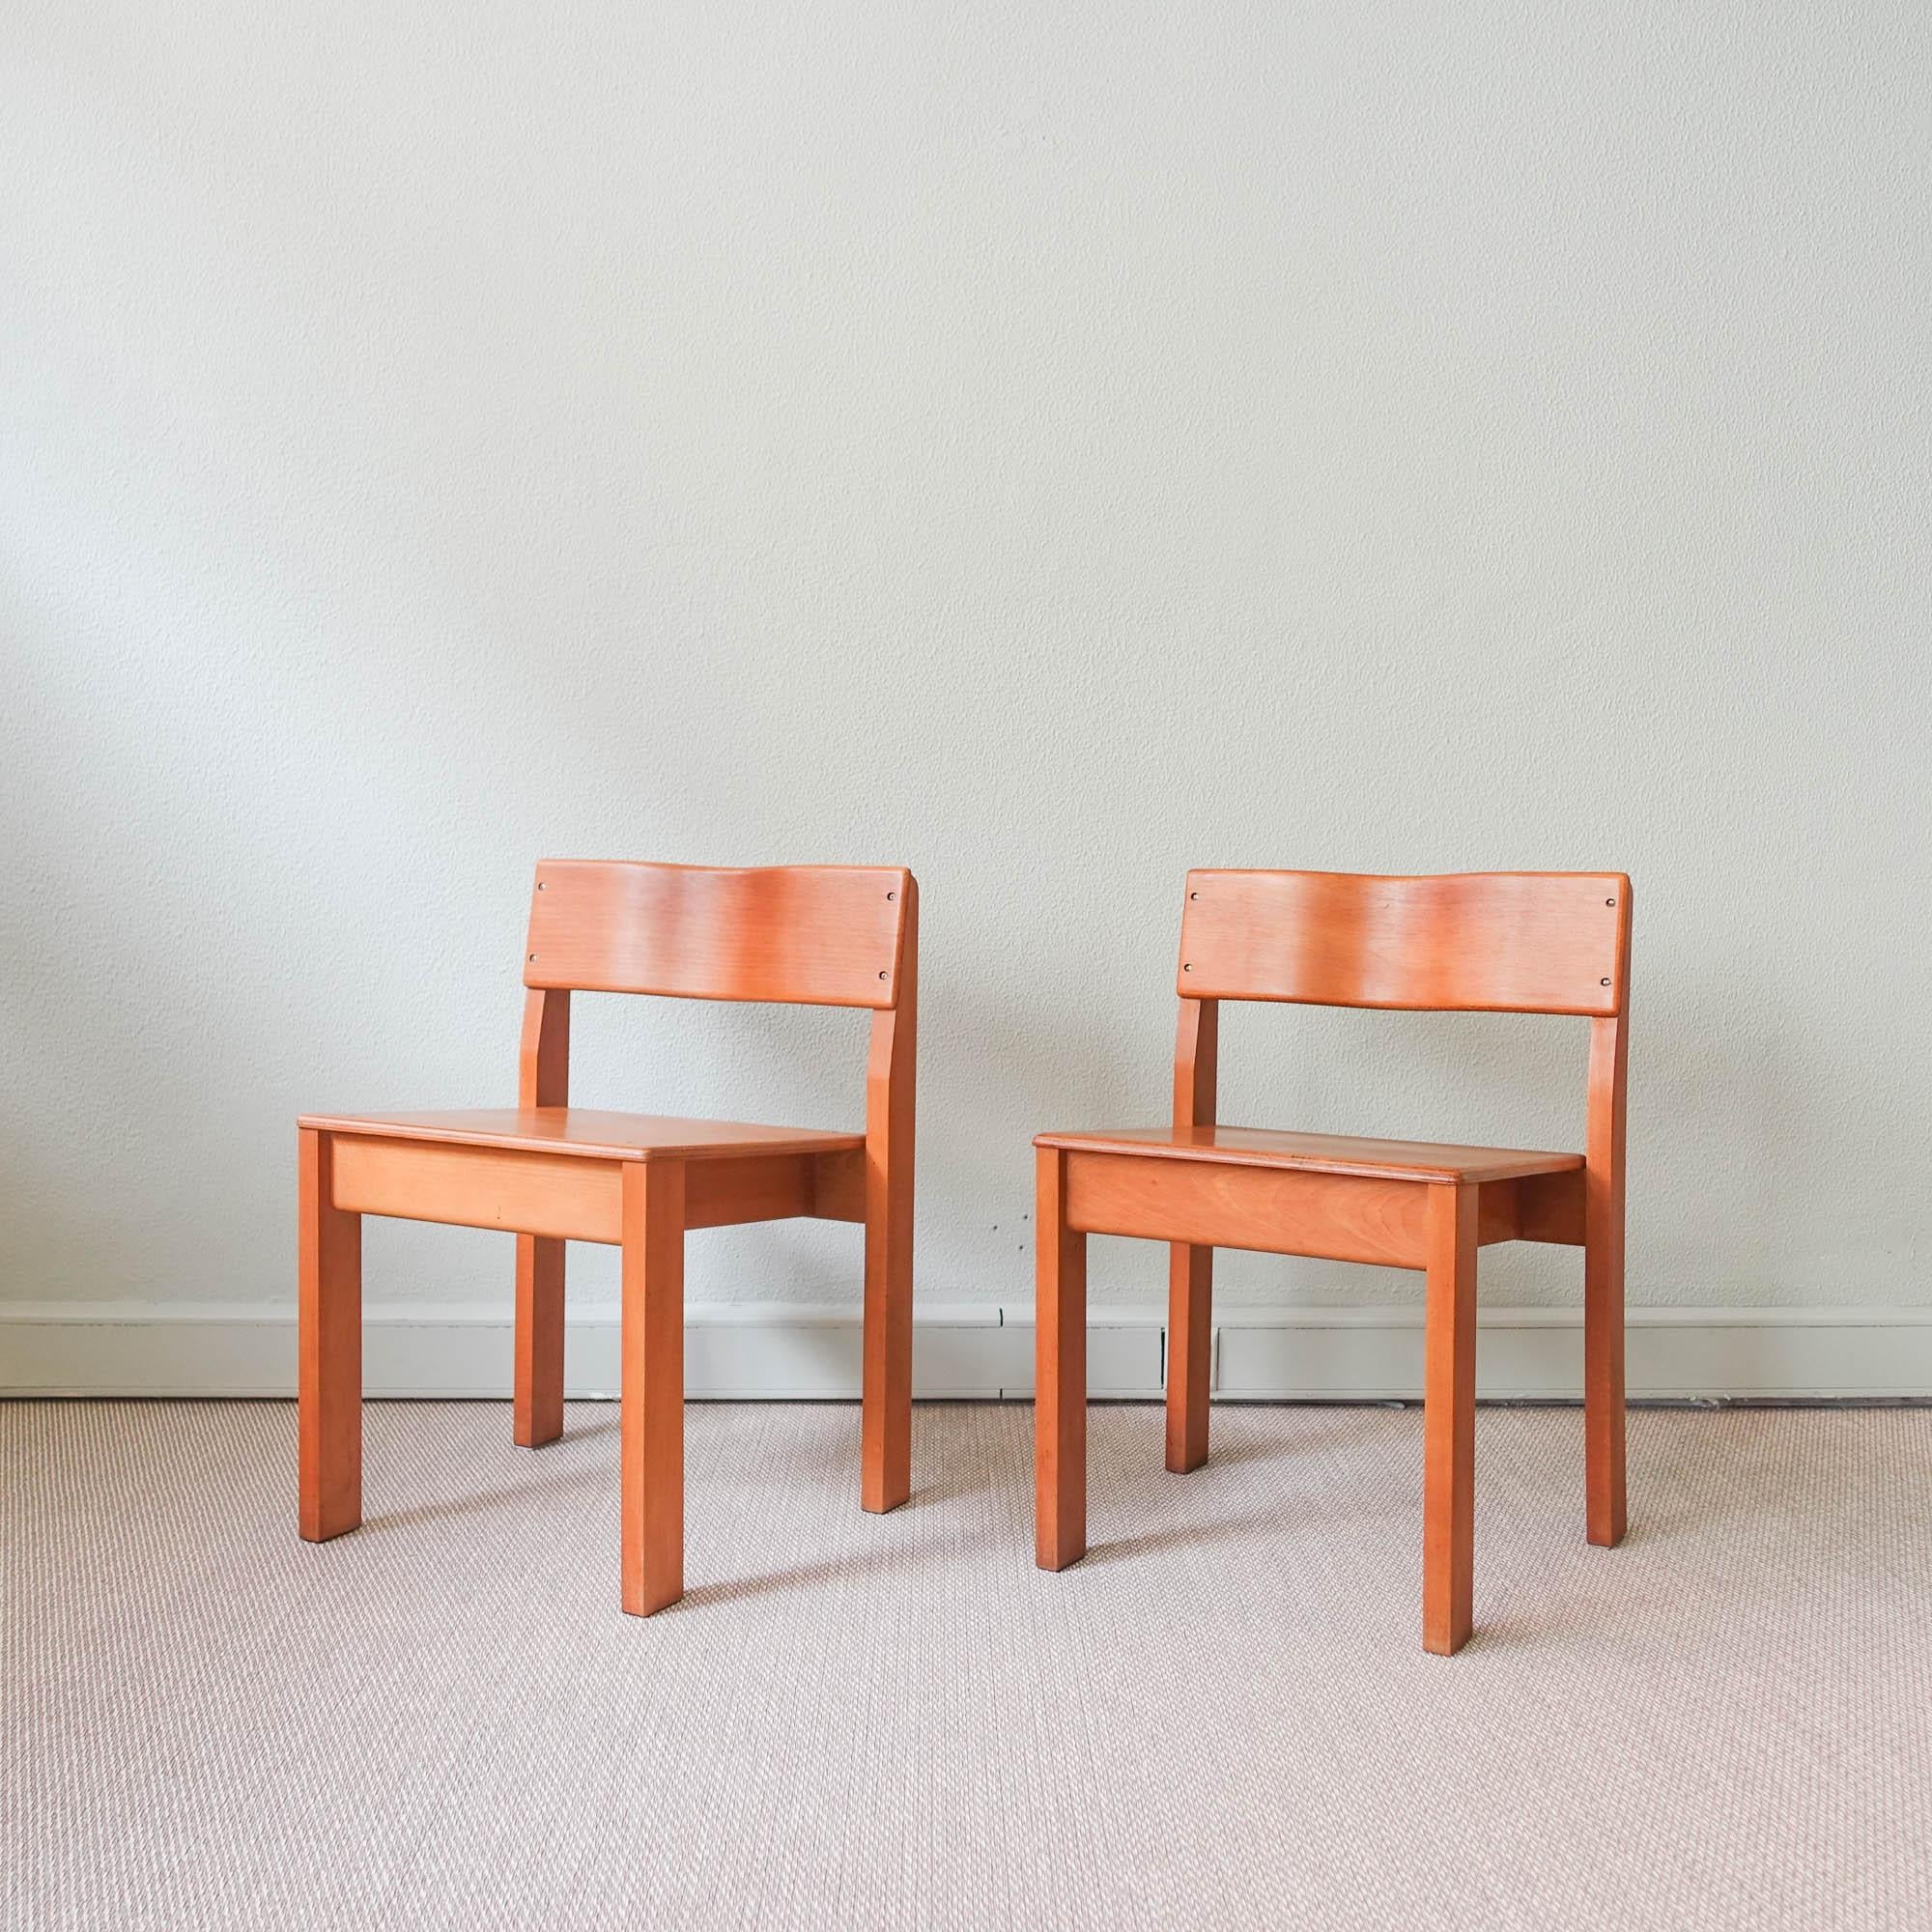 This pair of school chairs, model Sena, was designed by António Sena da Silva, in colaboration with Gastão Martins Machado and Leonor Álvares de Oliveira, and produced by Móveis Olaio, in Portugal between 1972 and 1988. After 1988 was produced by